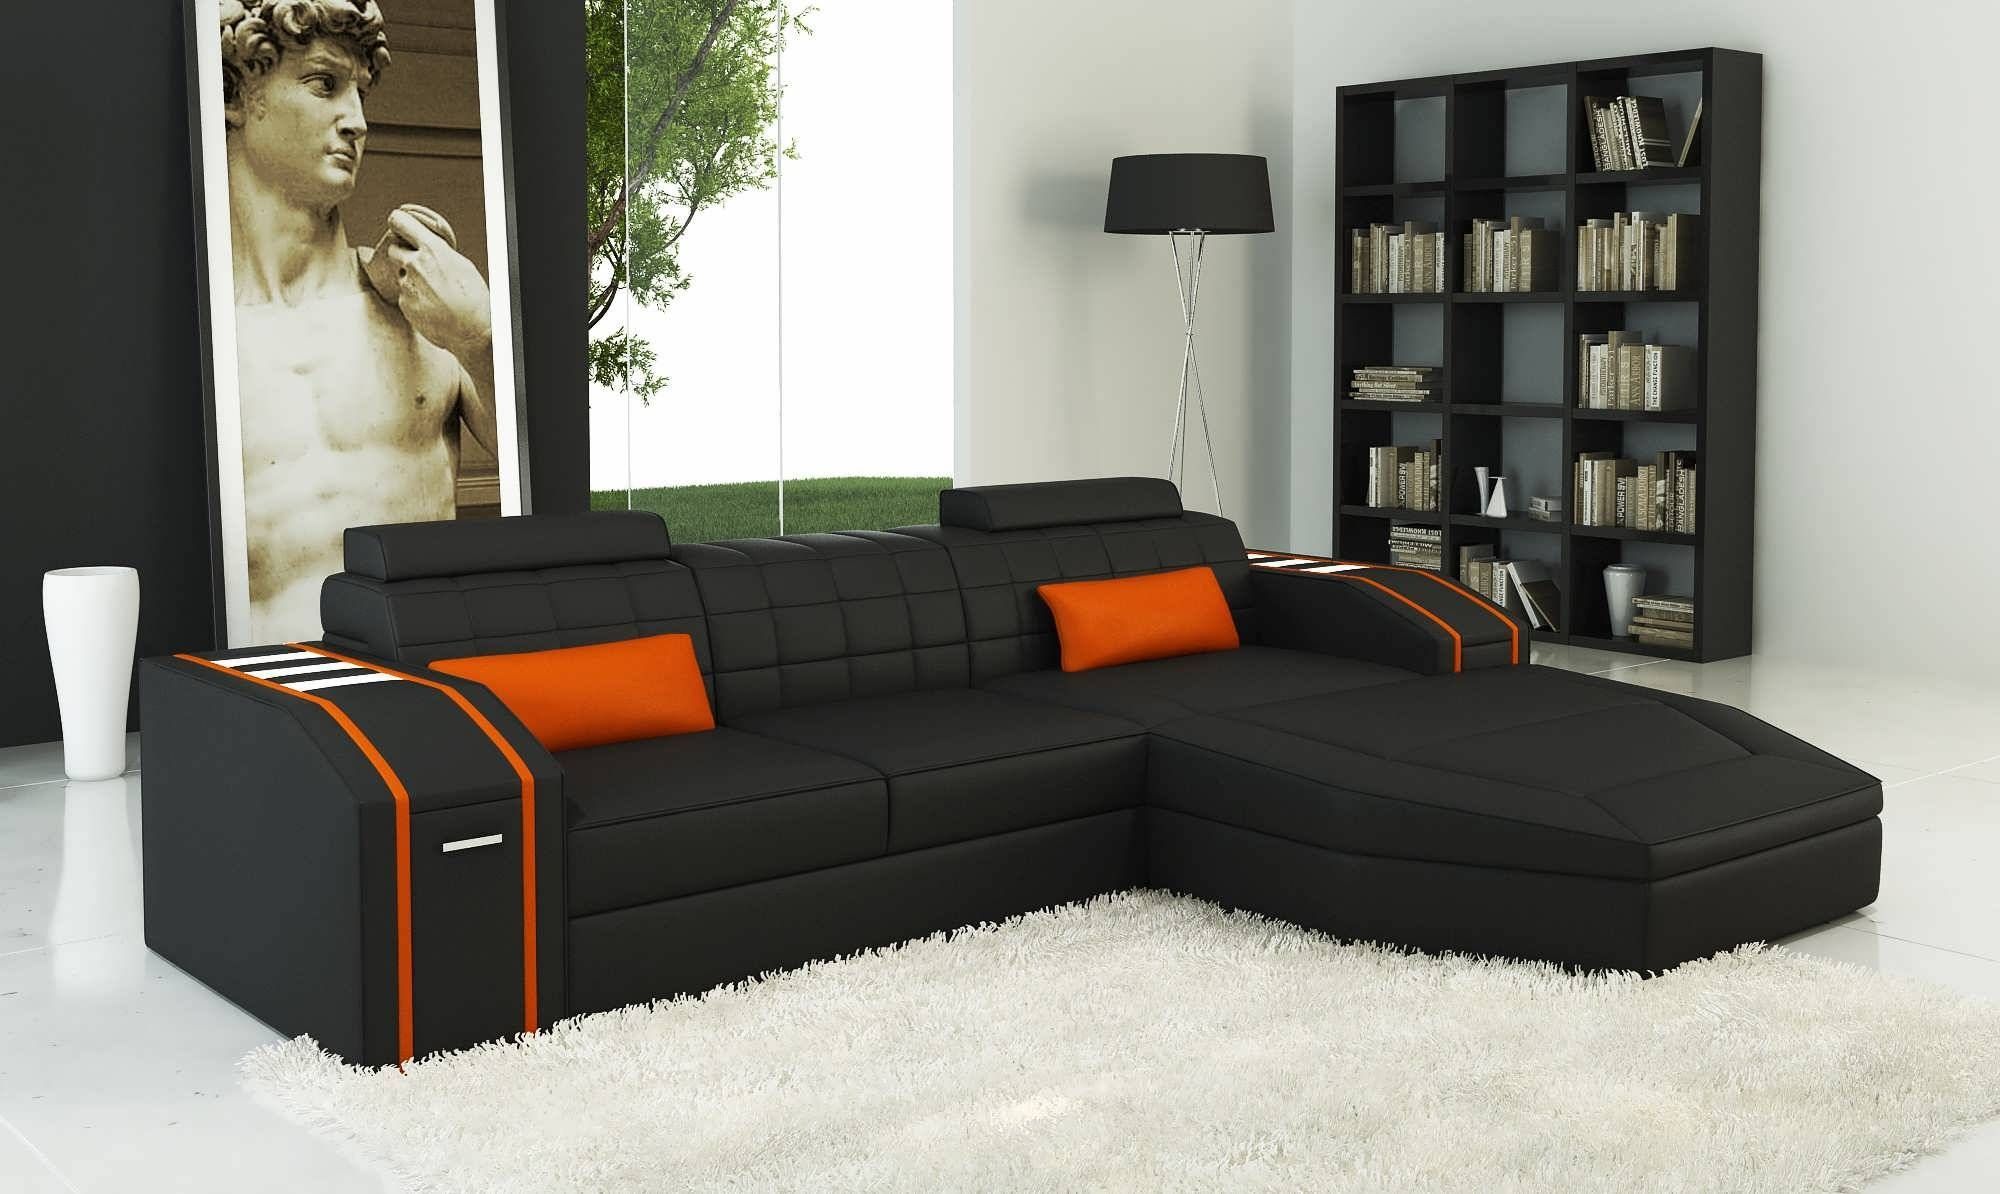 Couch Bed Tags : Black Sofa Decor Compact Small Black Couch Blue Regarding Small Black Sofas (View 3 of 15)